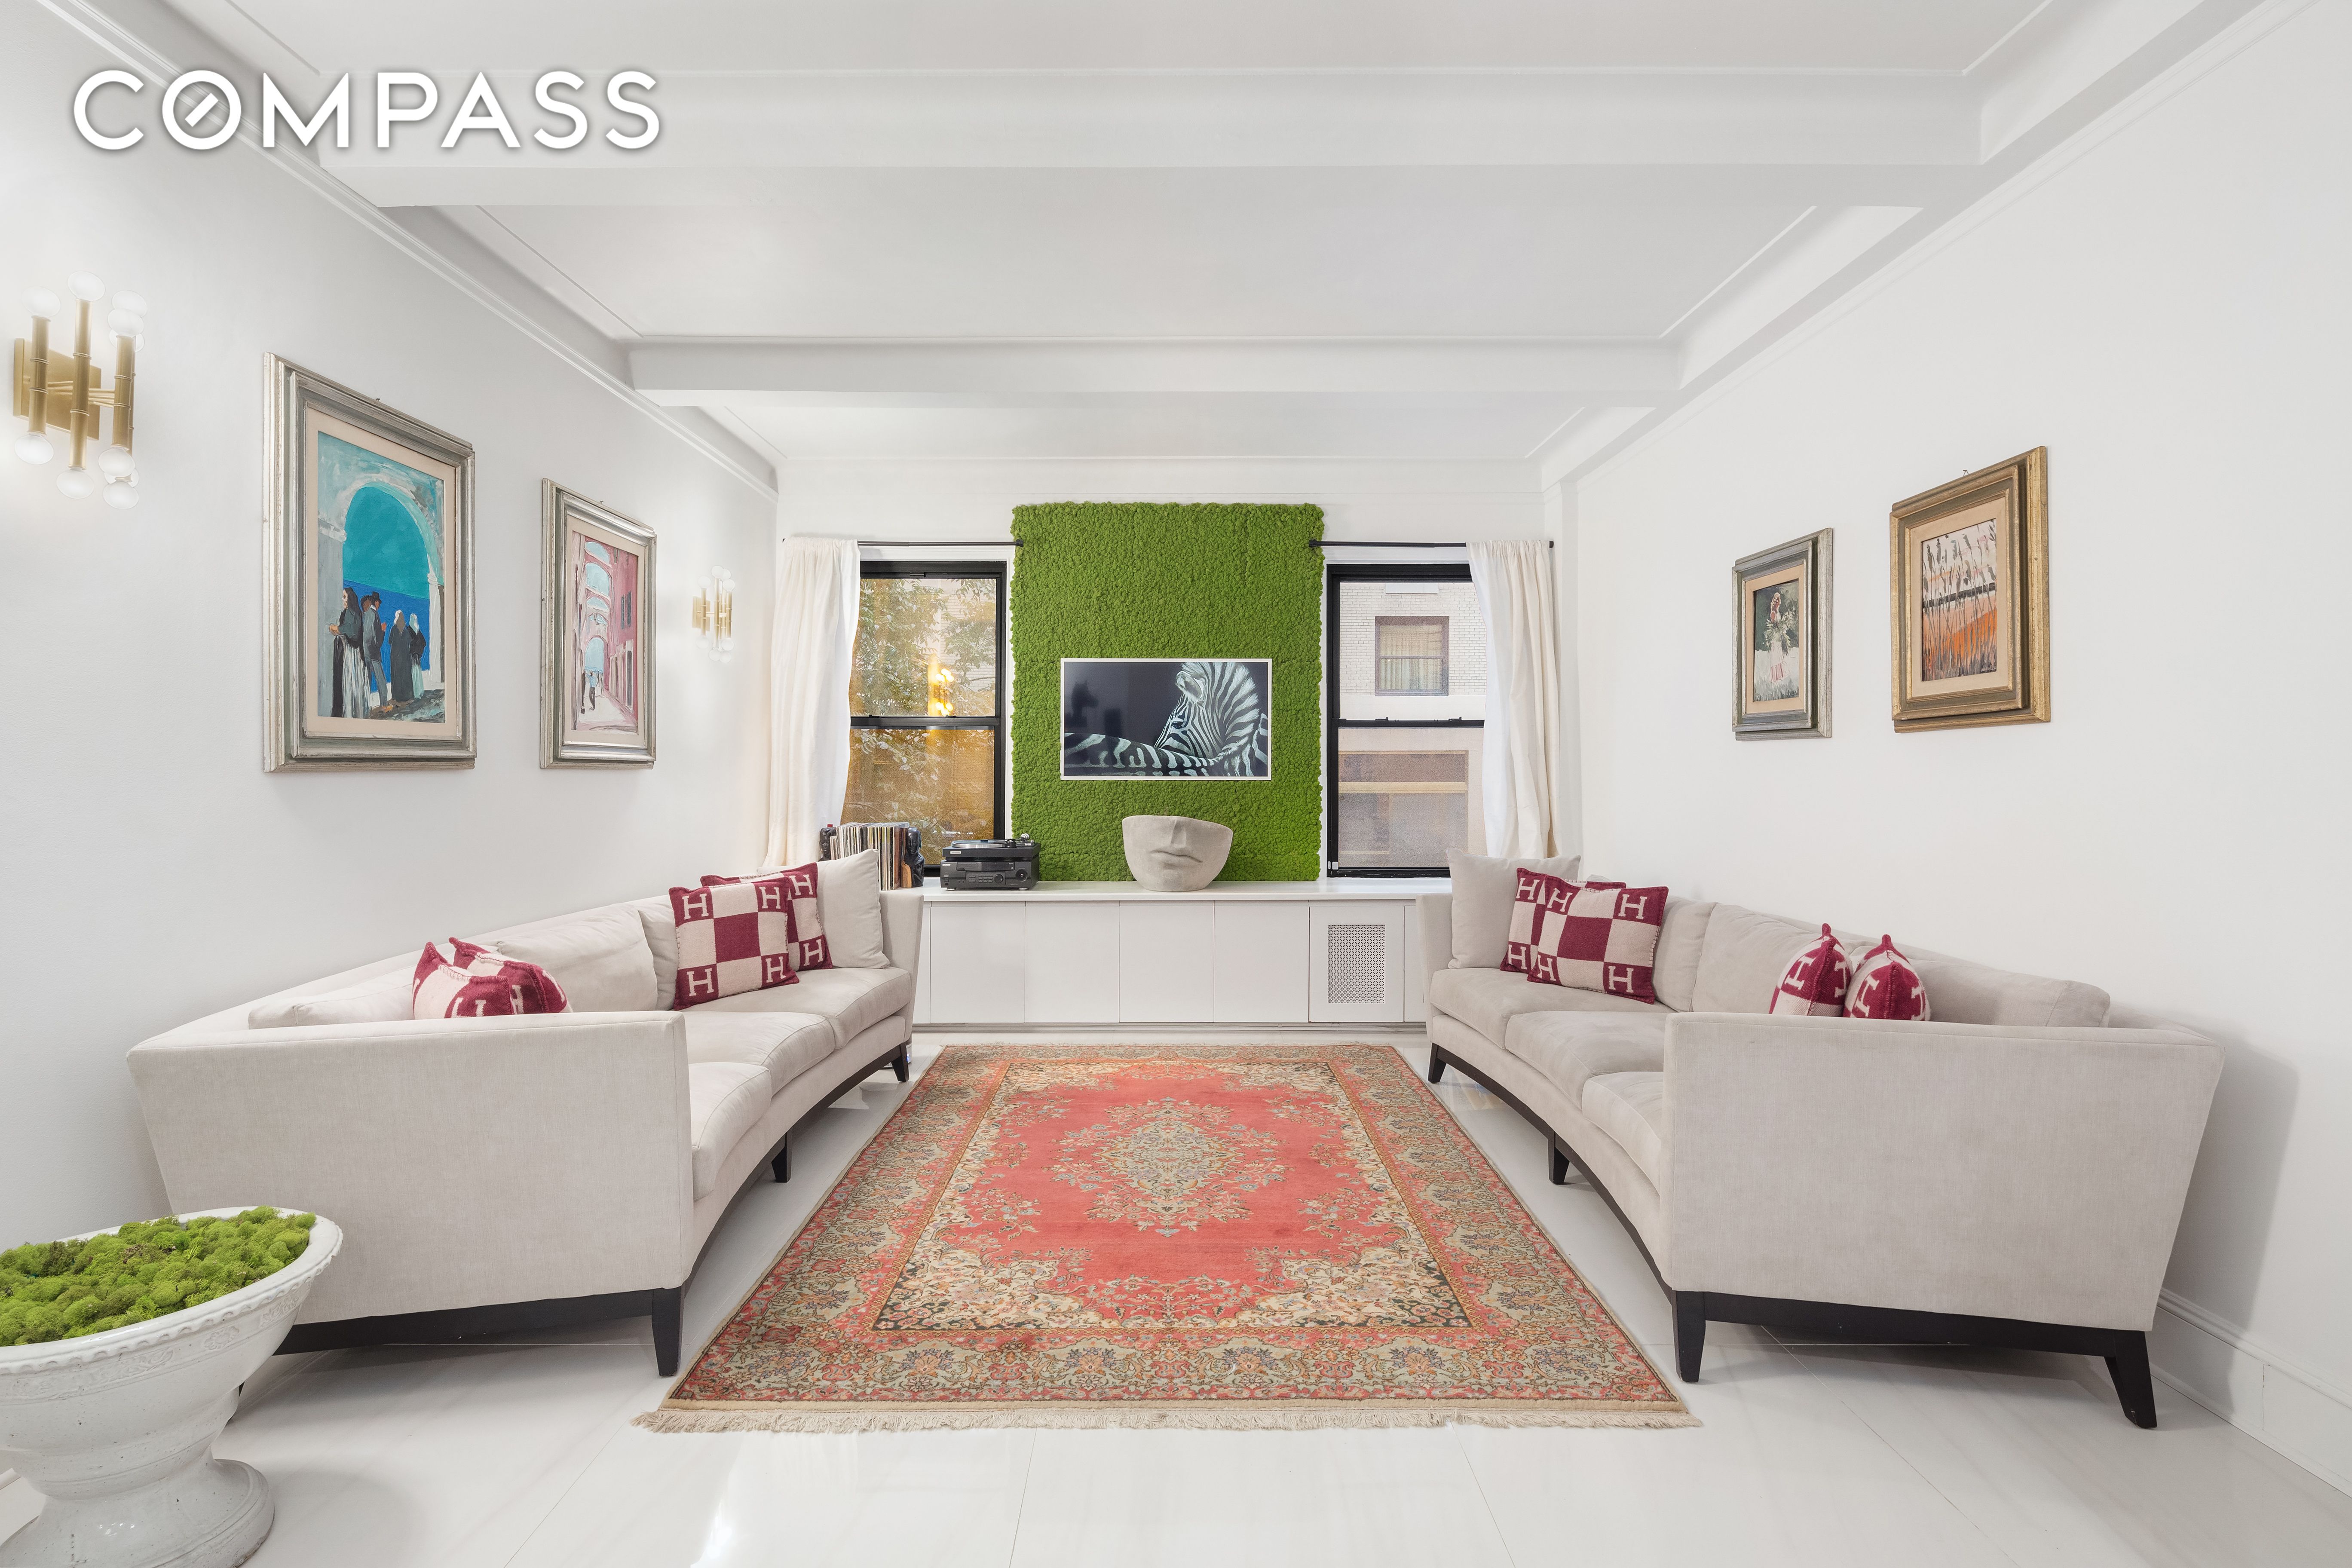 152 West 58th Street 2A, Midtown Central, Midtown East, NYC - 2 Bedrooms  
2 Bathrooms  
4 Rooms - 